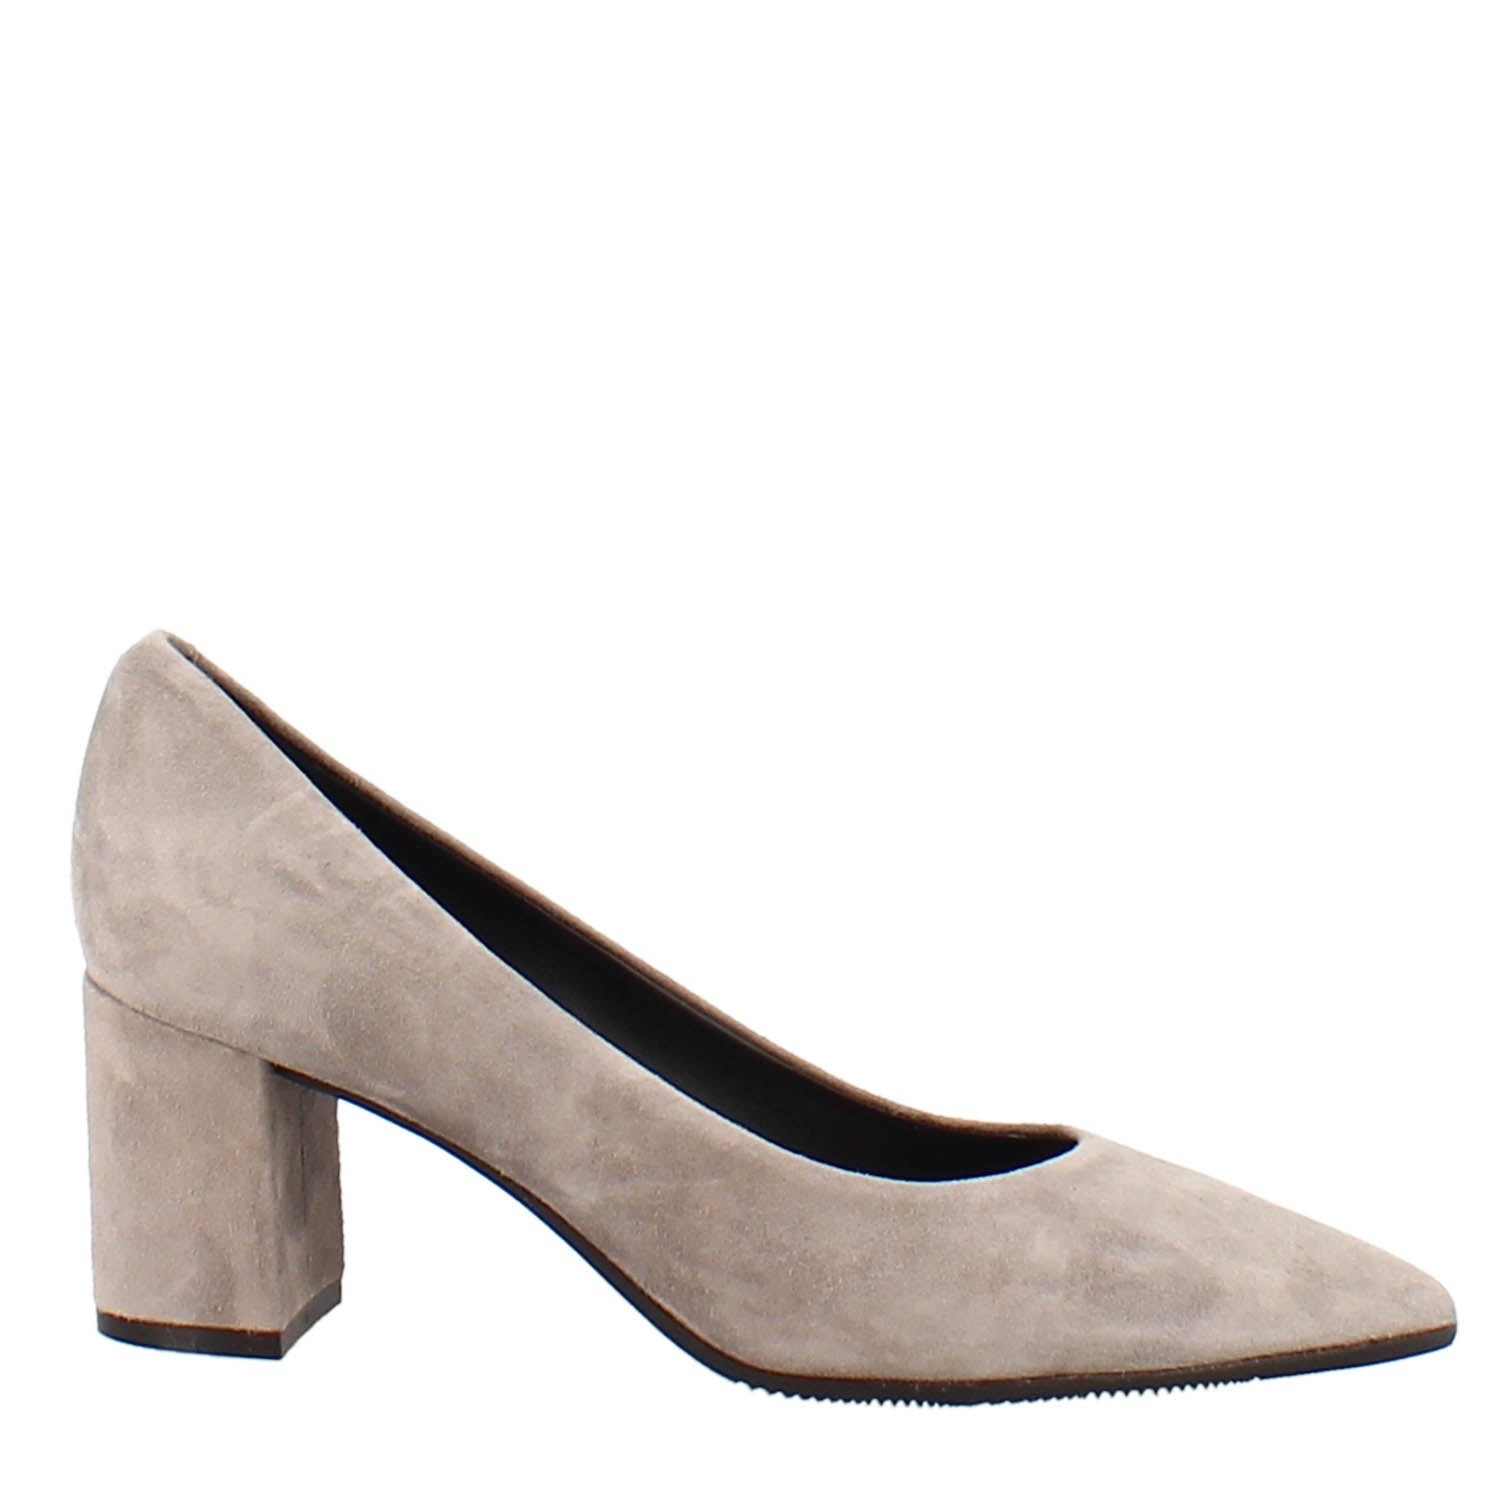 Décolleté in dove gray suede with high heel